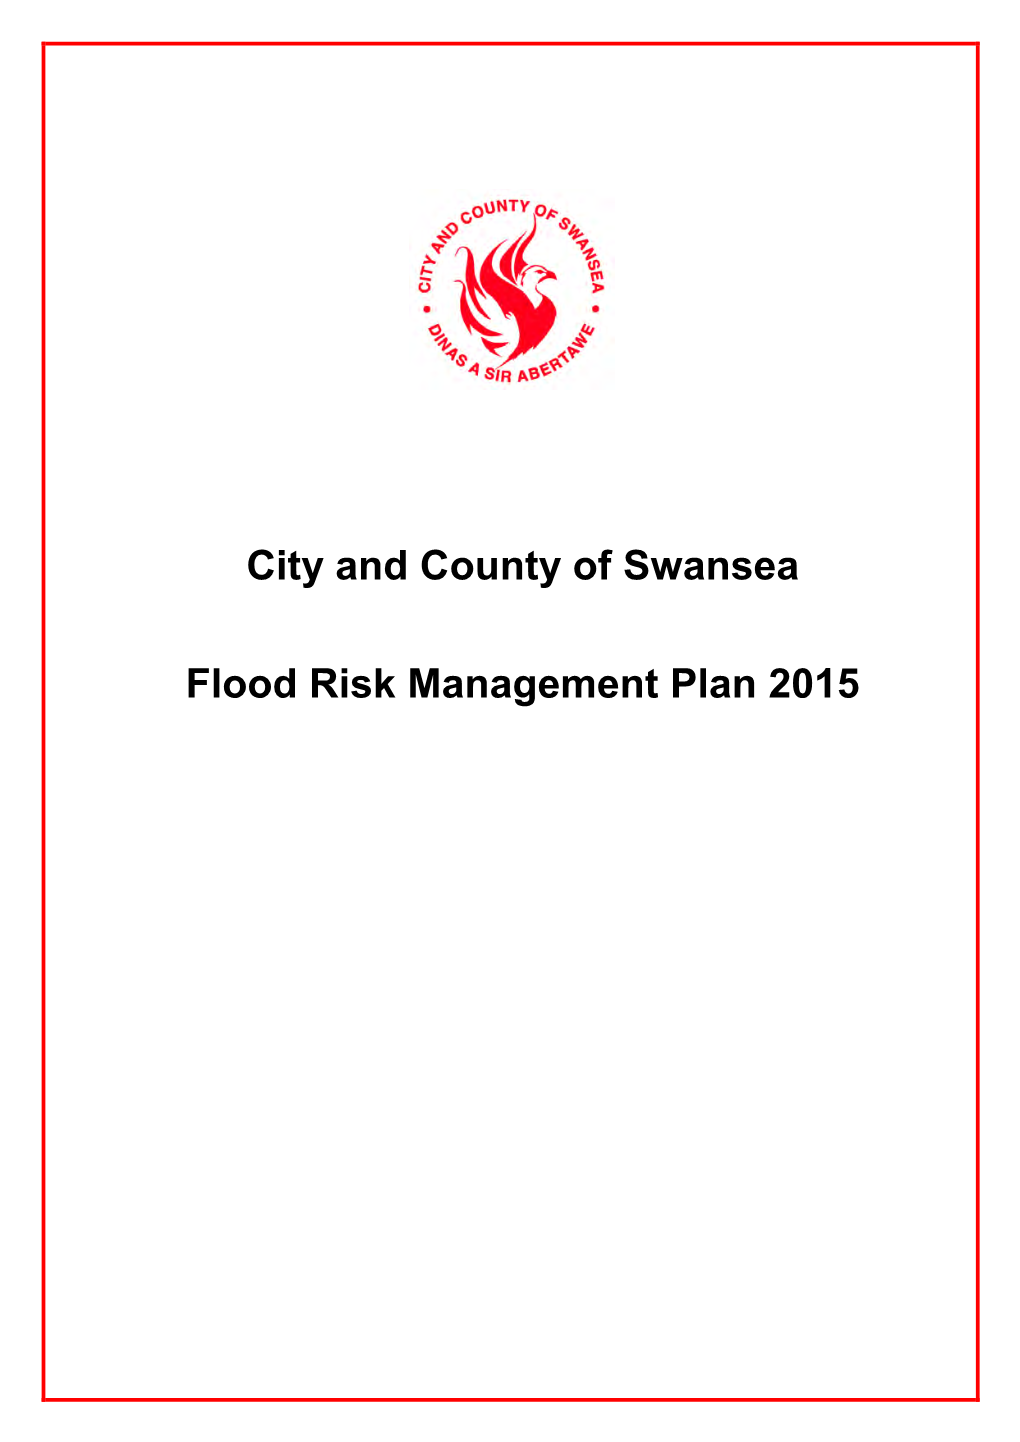 City and County of Swansea Flood Risk Management Plan 2015